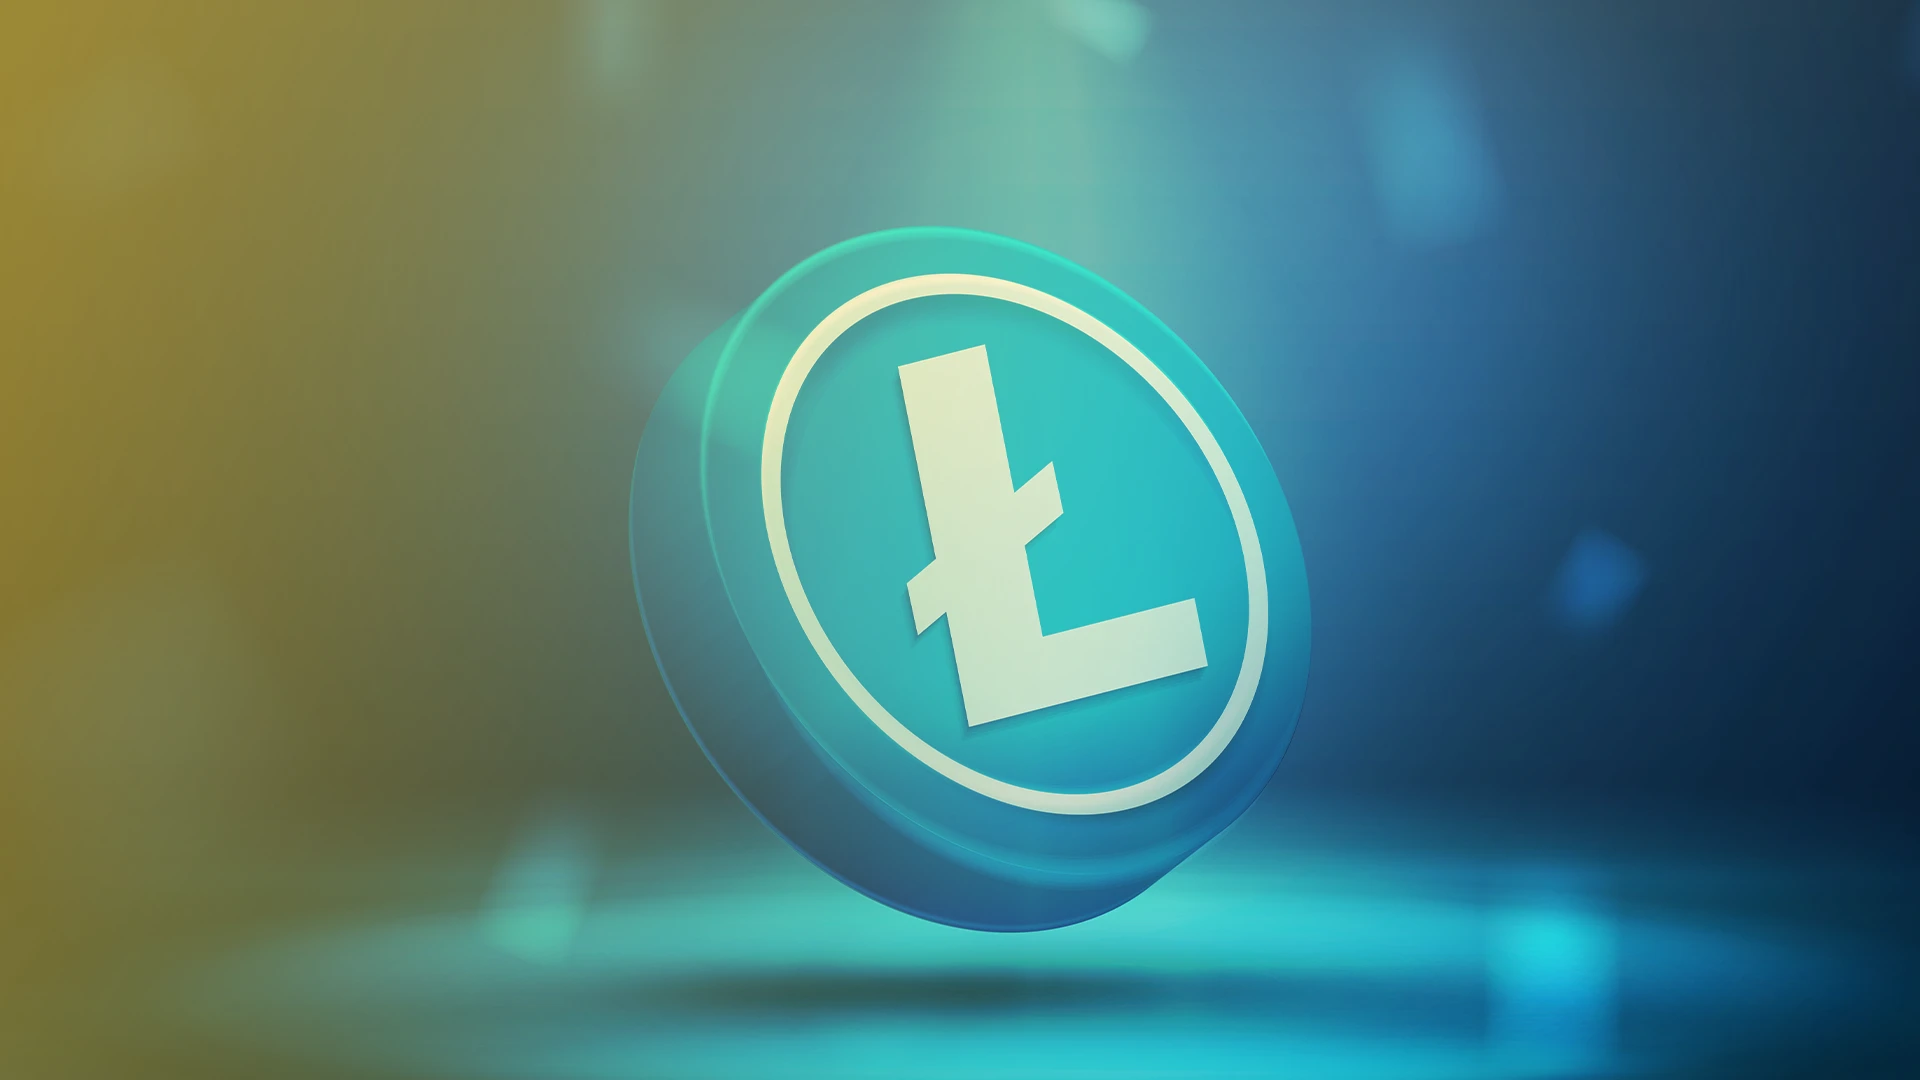 How To Mine Litecoin: The Ultimate Guide To Litecoin Mining